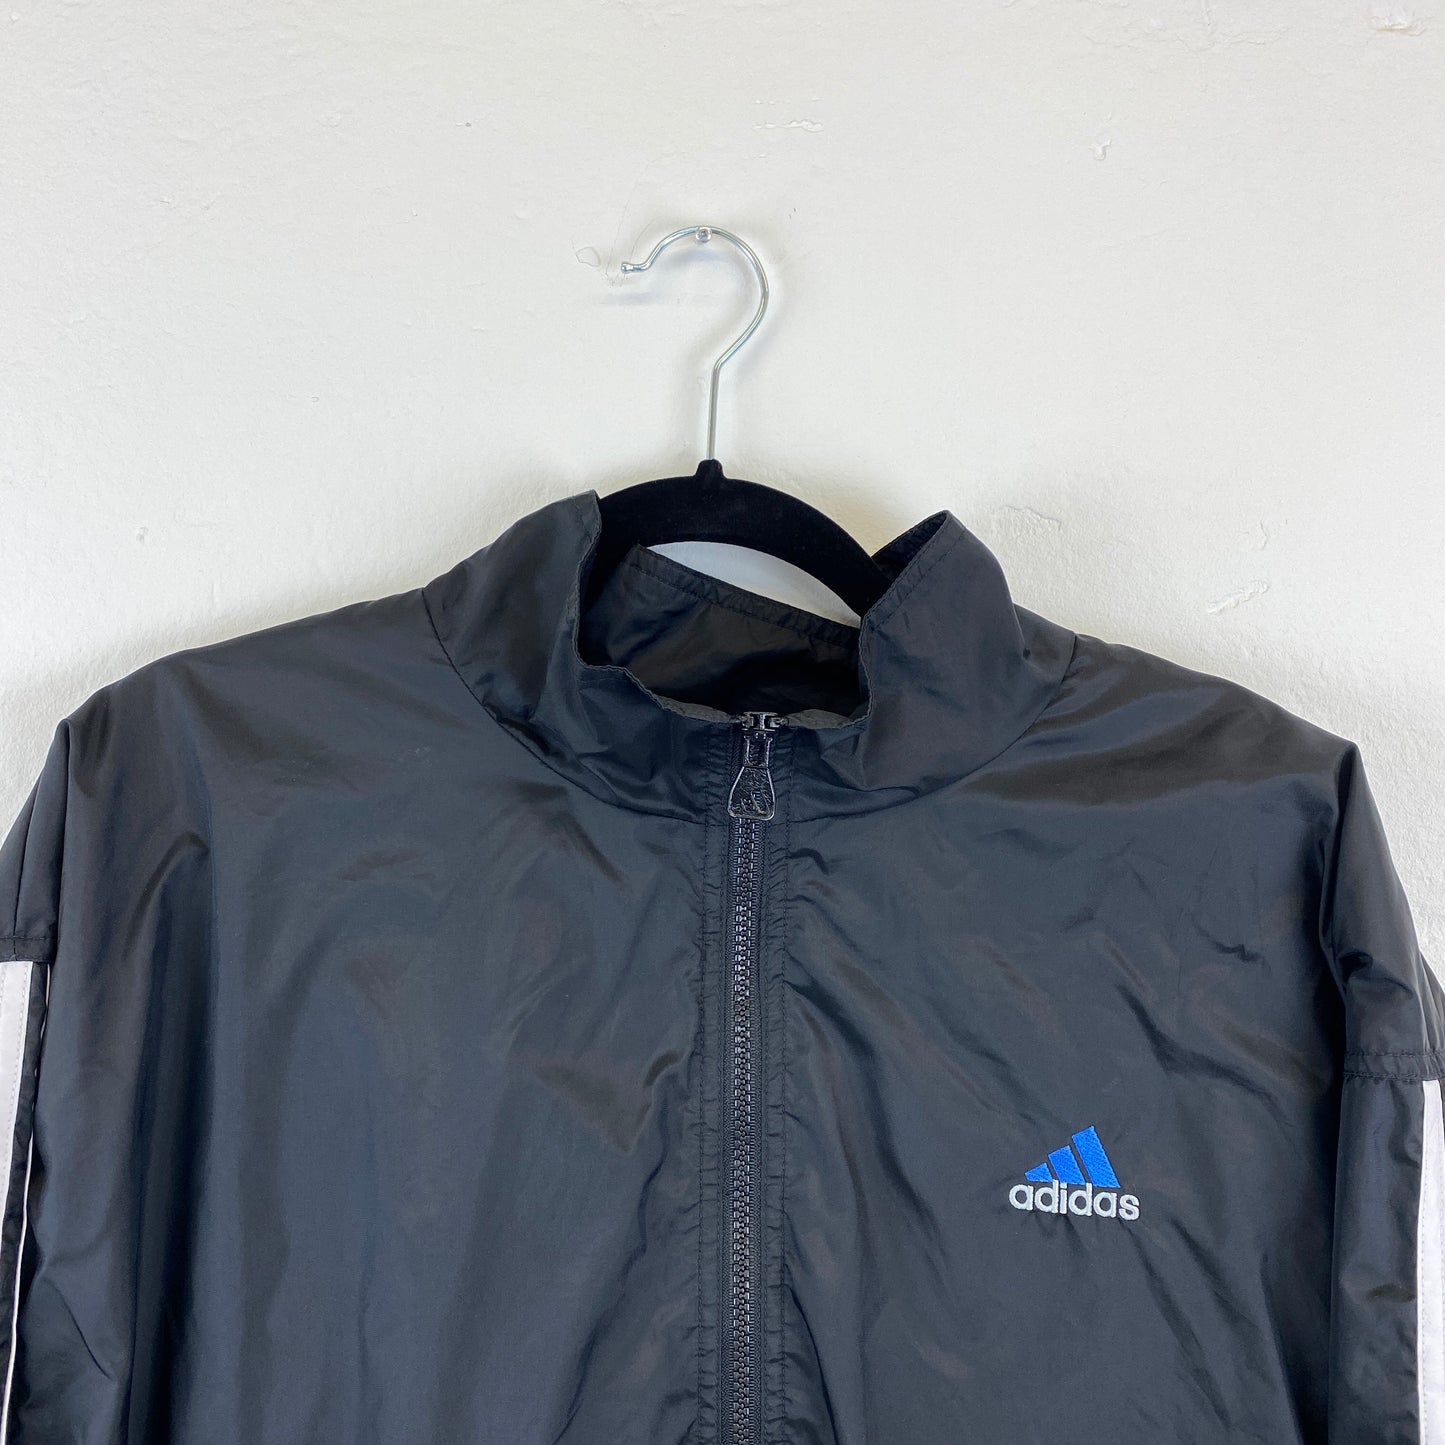 Adidas embroidered track jacket (L-XL)